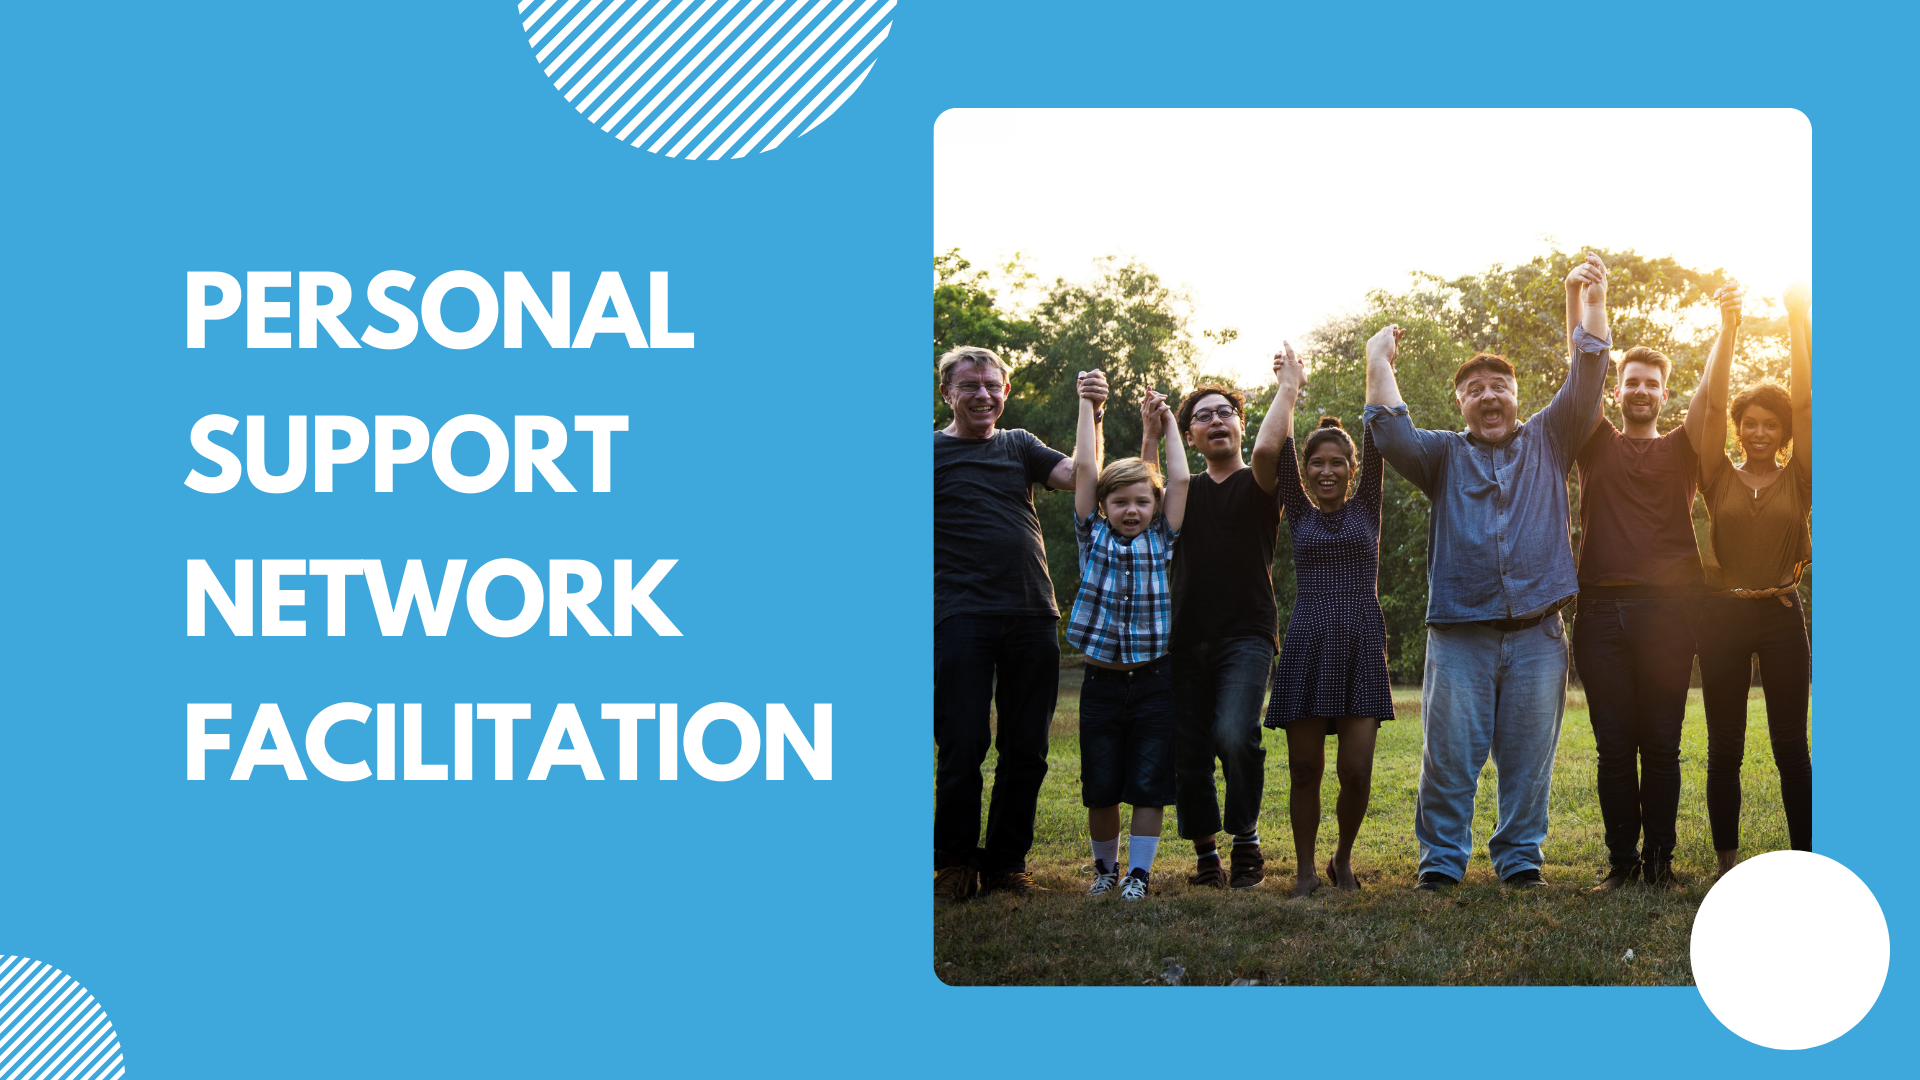 Cerulean blue background. The text on the left reads Personal Support Network Facilitation. A large photo of a group of people raising their hands in the air on the right.